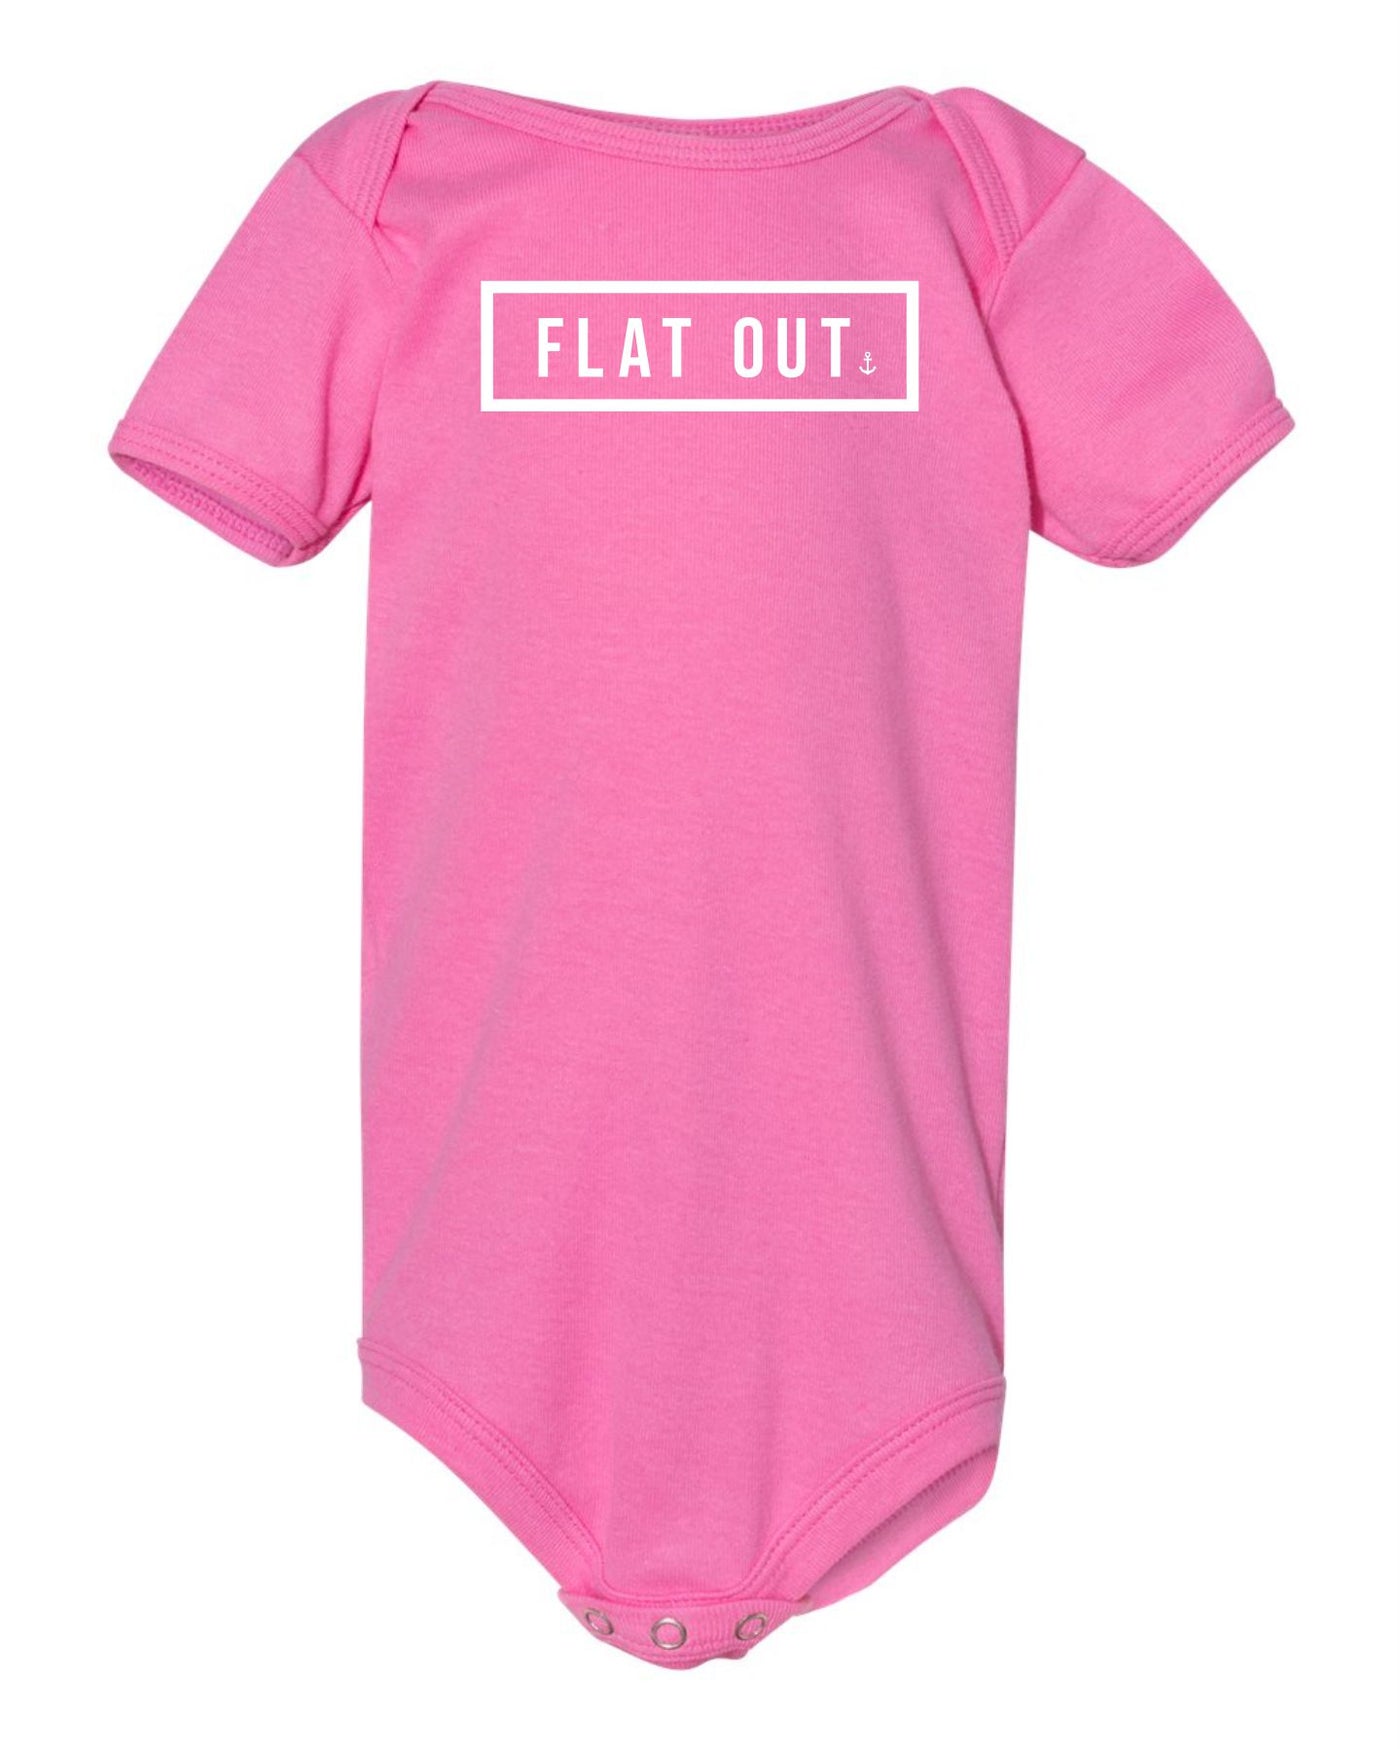 "Flat Out" Onesie